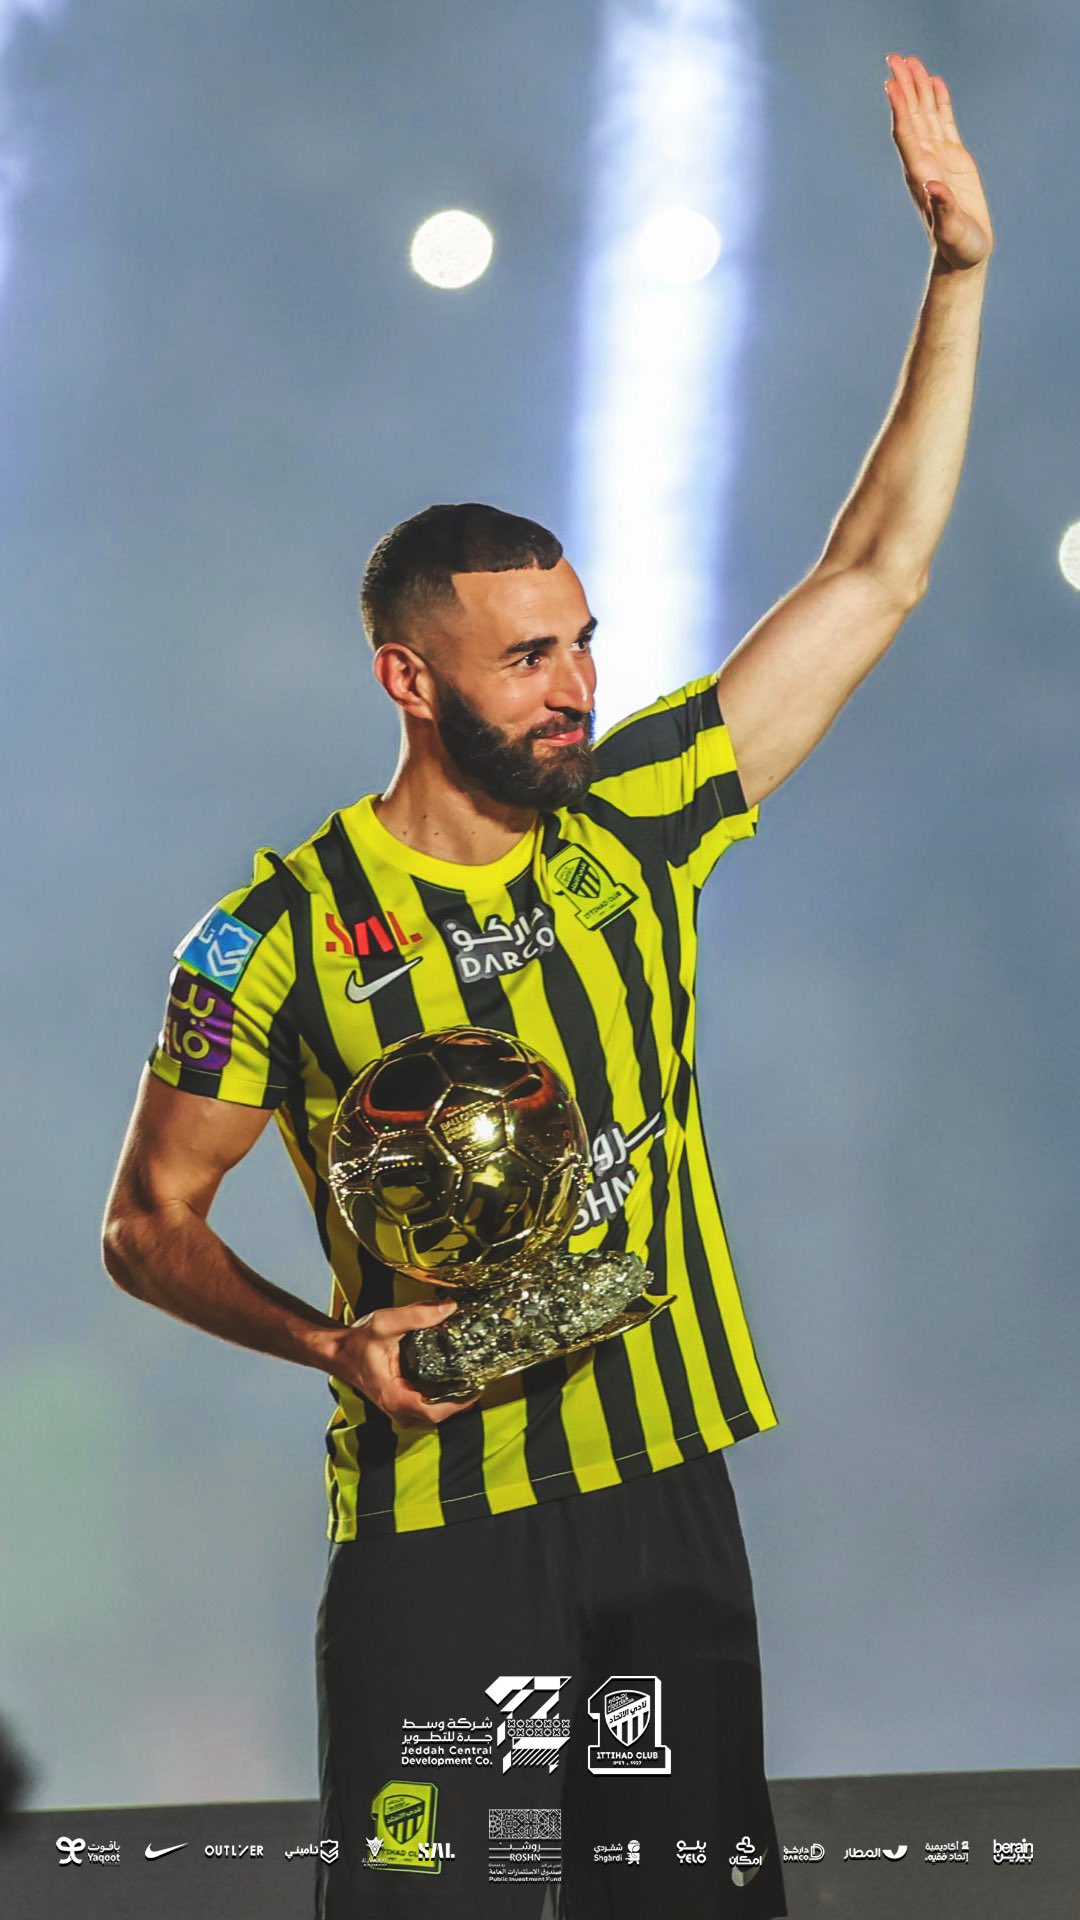 Ittihad Club for some fresh wallpaper for your phone ? Check out these amazing KB9 wallpaper and keep your favorite footballer always close